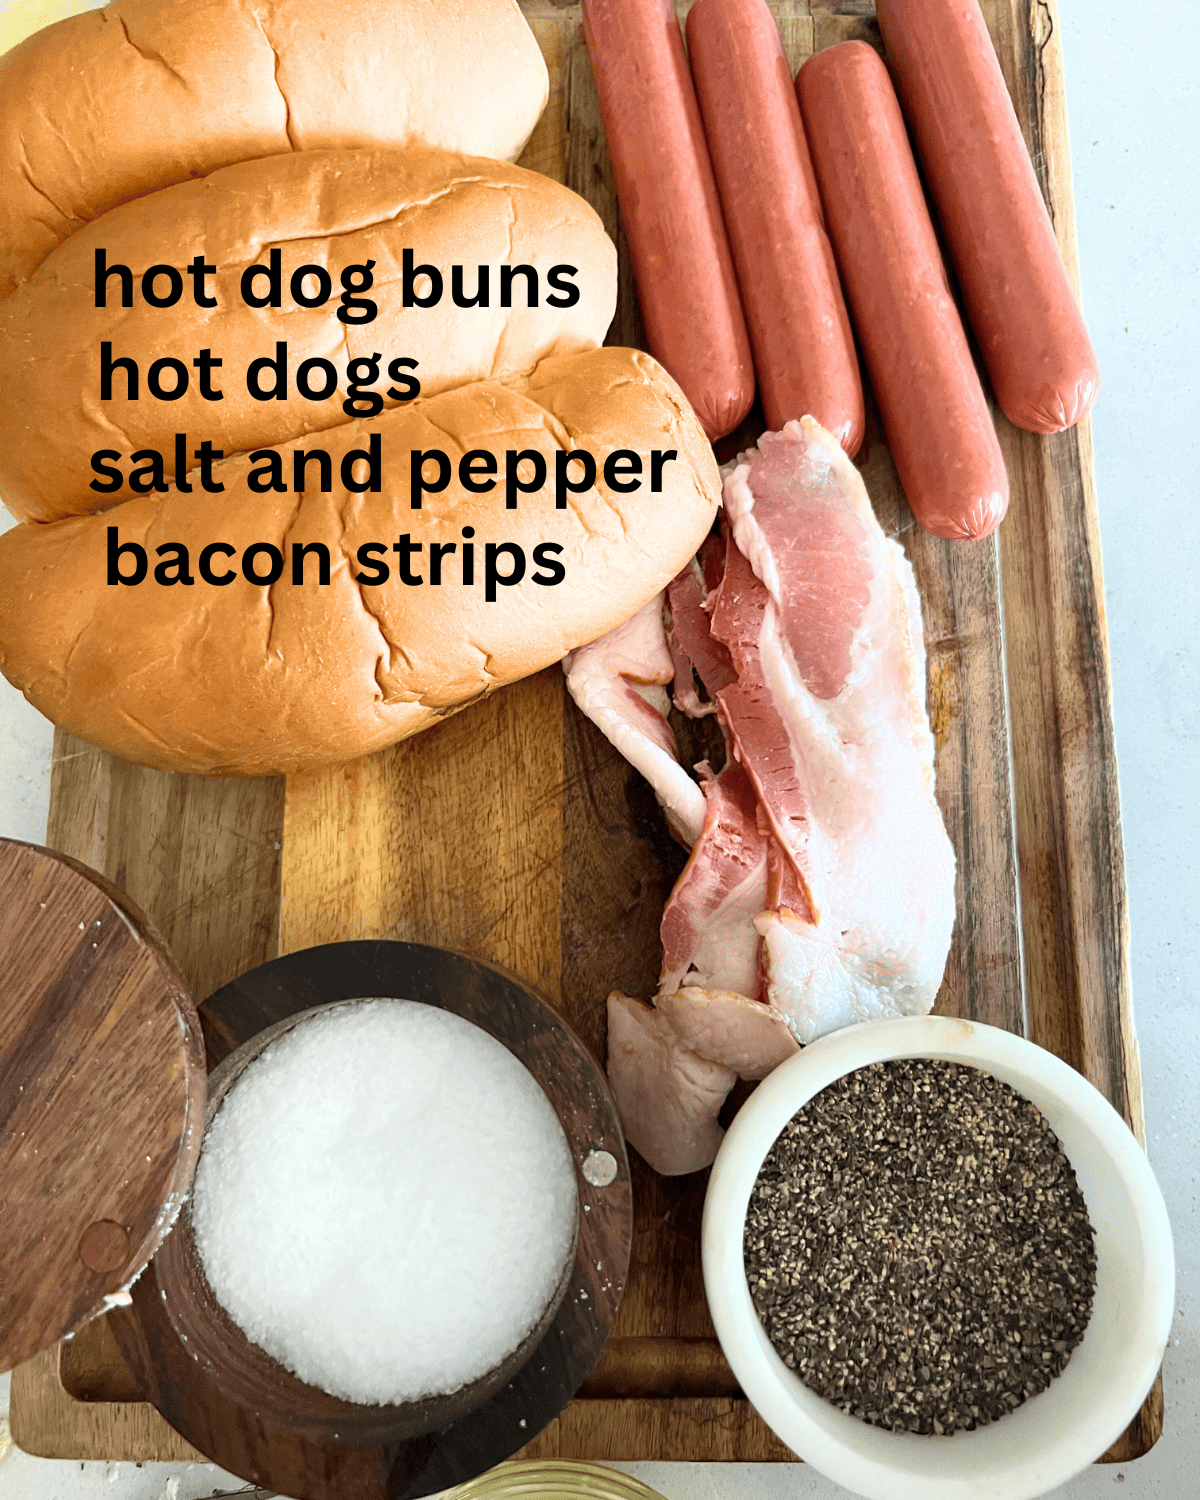 How do you make a hot dog taste even better? Wrap it in some bacon of course! This bacon-wrapped hot dog is the best hot dog you will ever eat. 